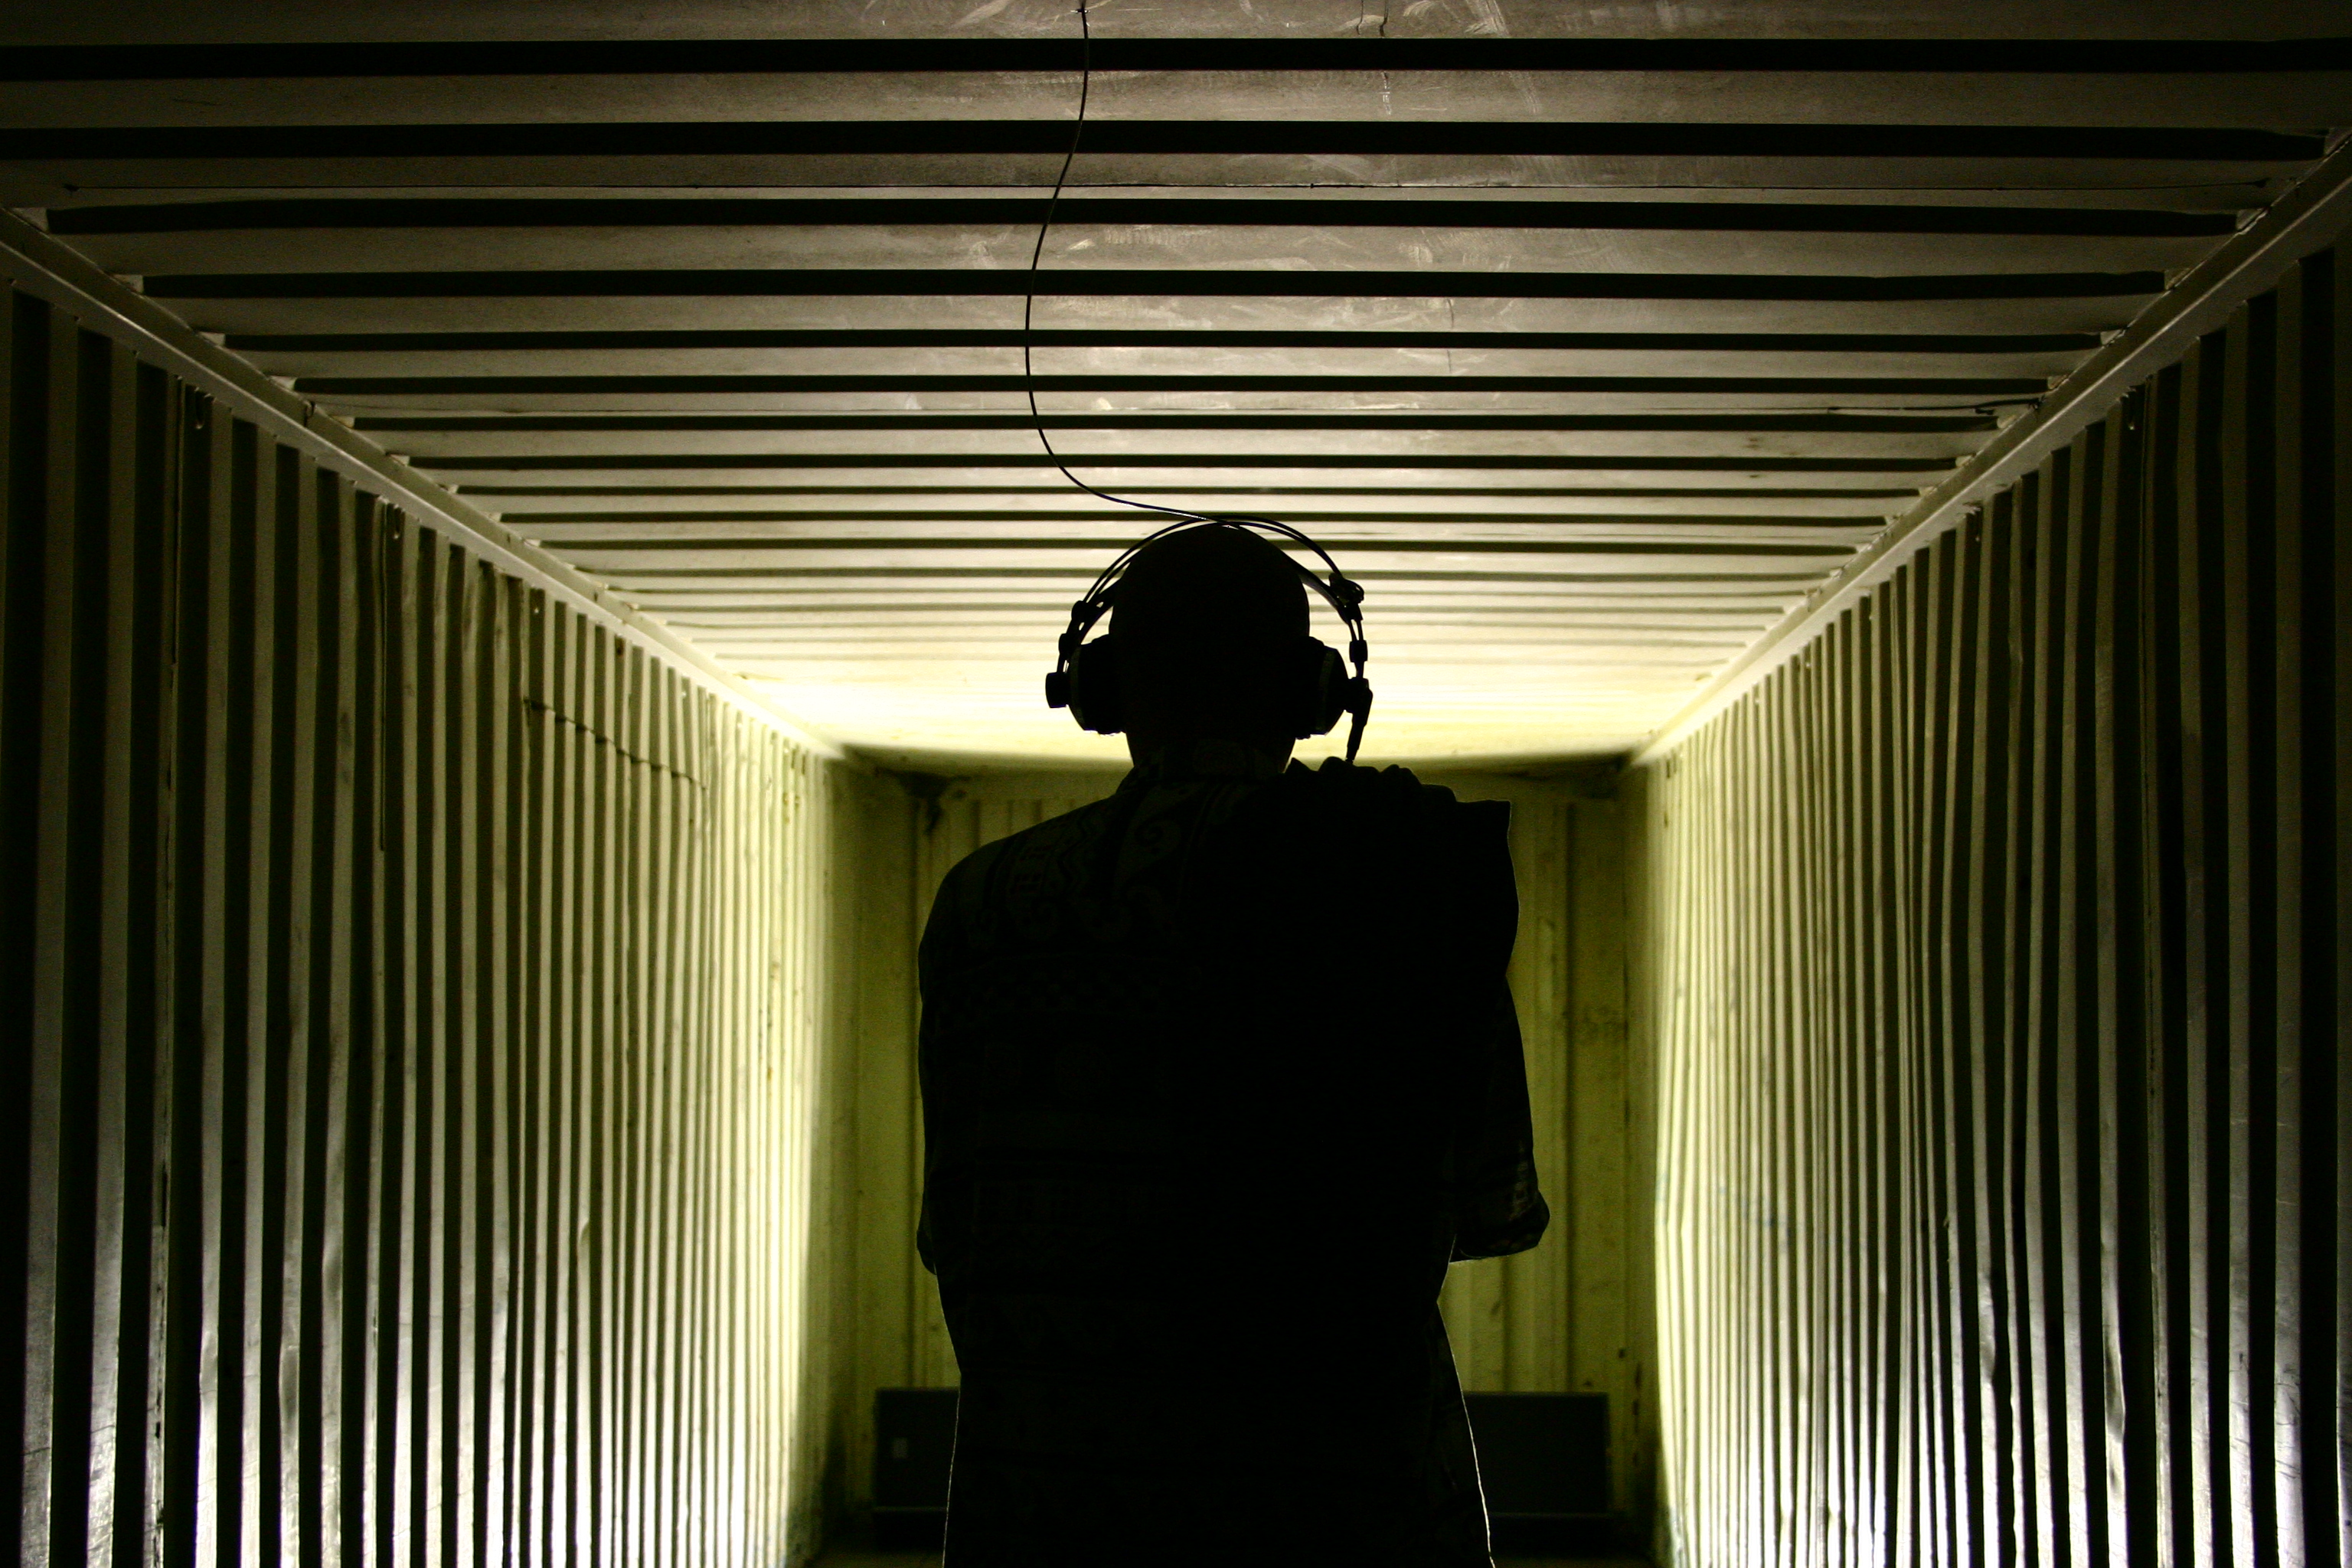 Image: "Gogbot," Installation at the Gogbot Media Art Festival in Enschede. By Flickr user Ineke